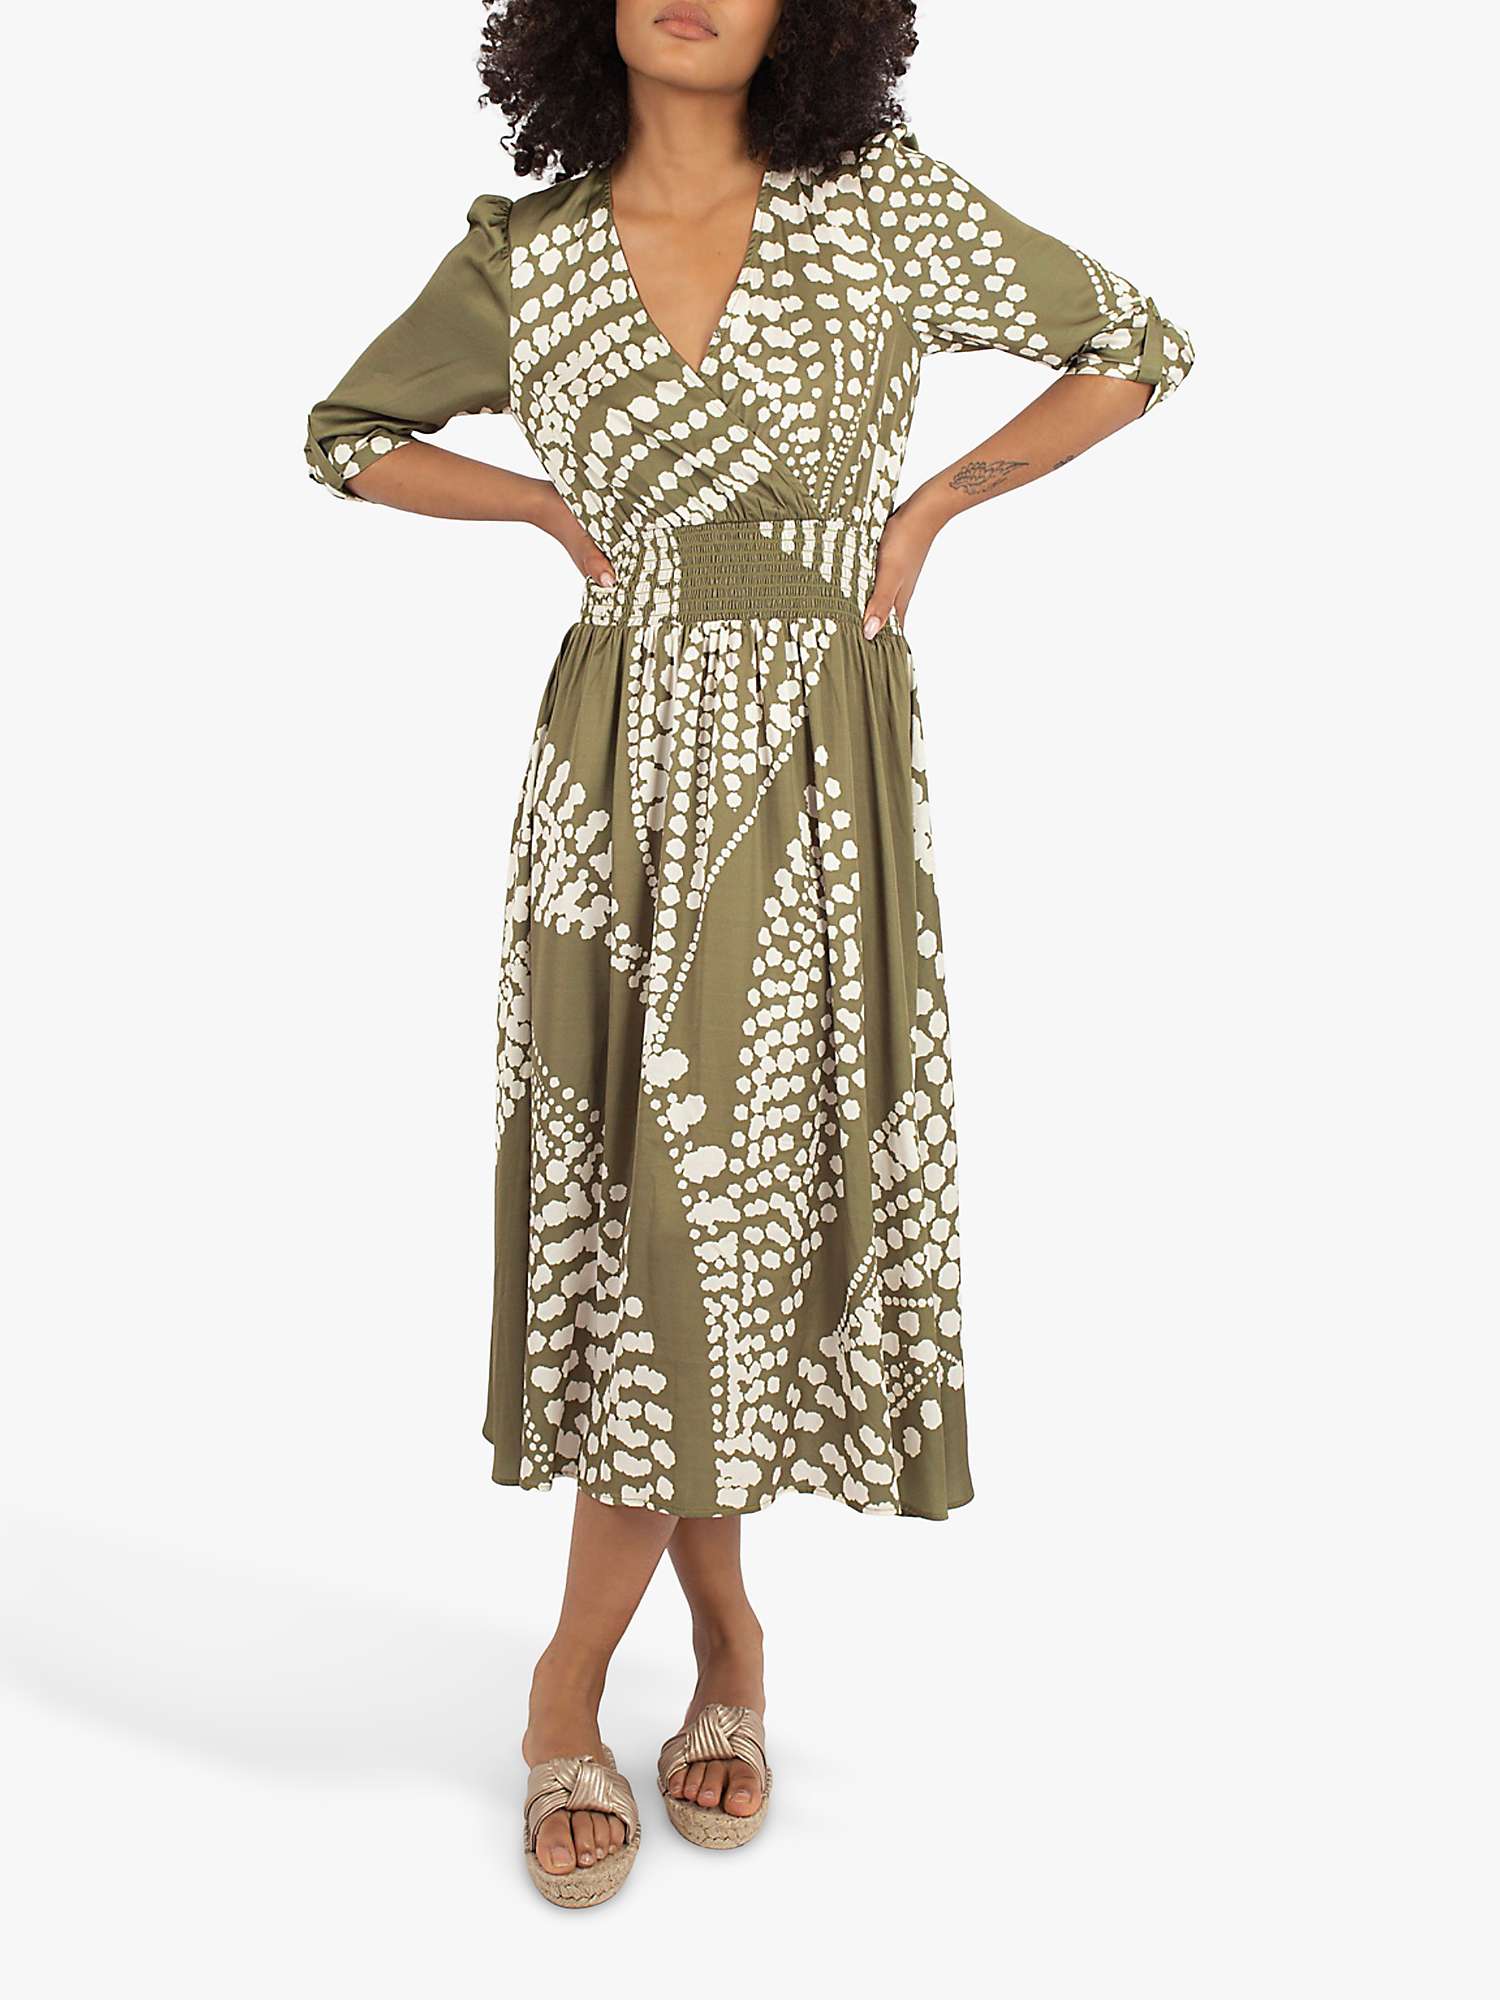 Buy Traffic People The Odes Maia Silk Blend Dress, Olive Online at johnlewis.com